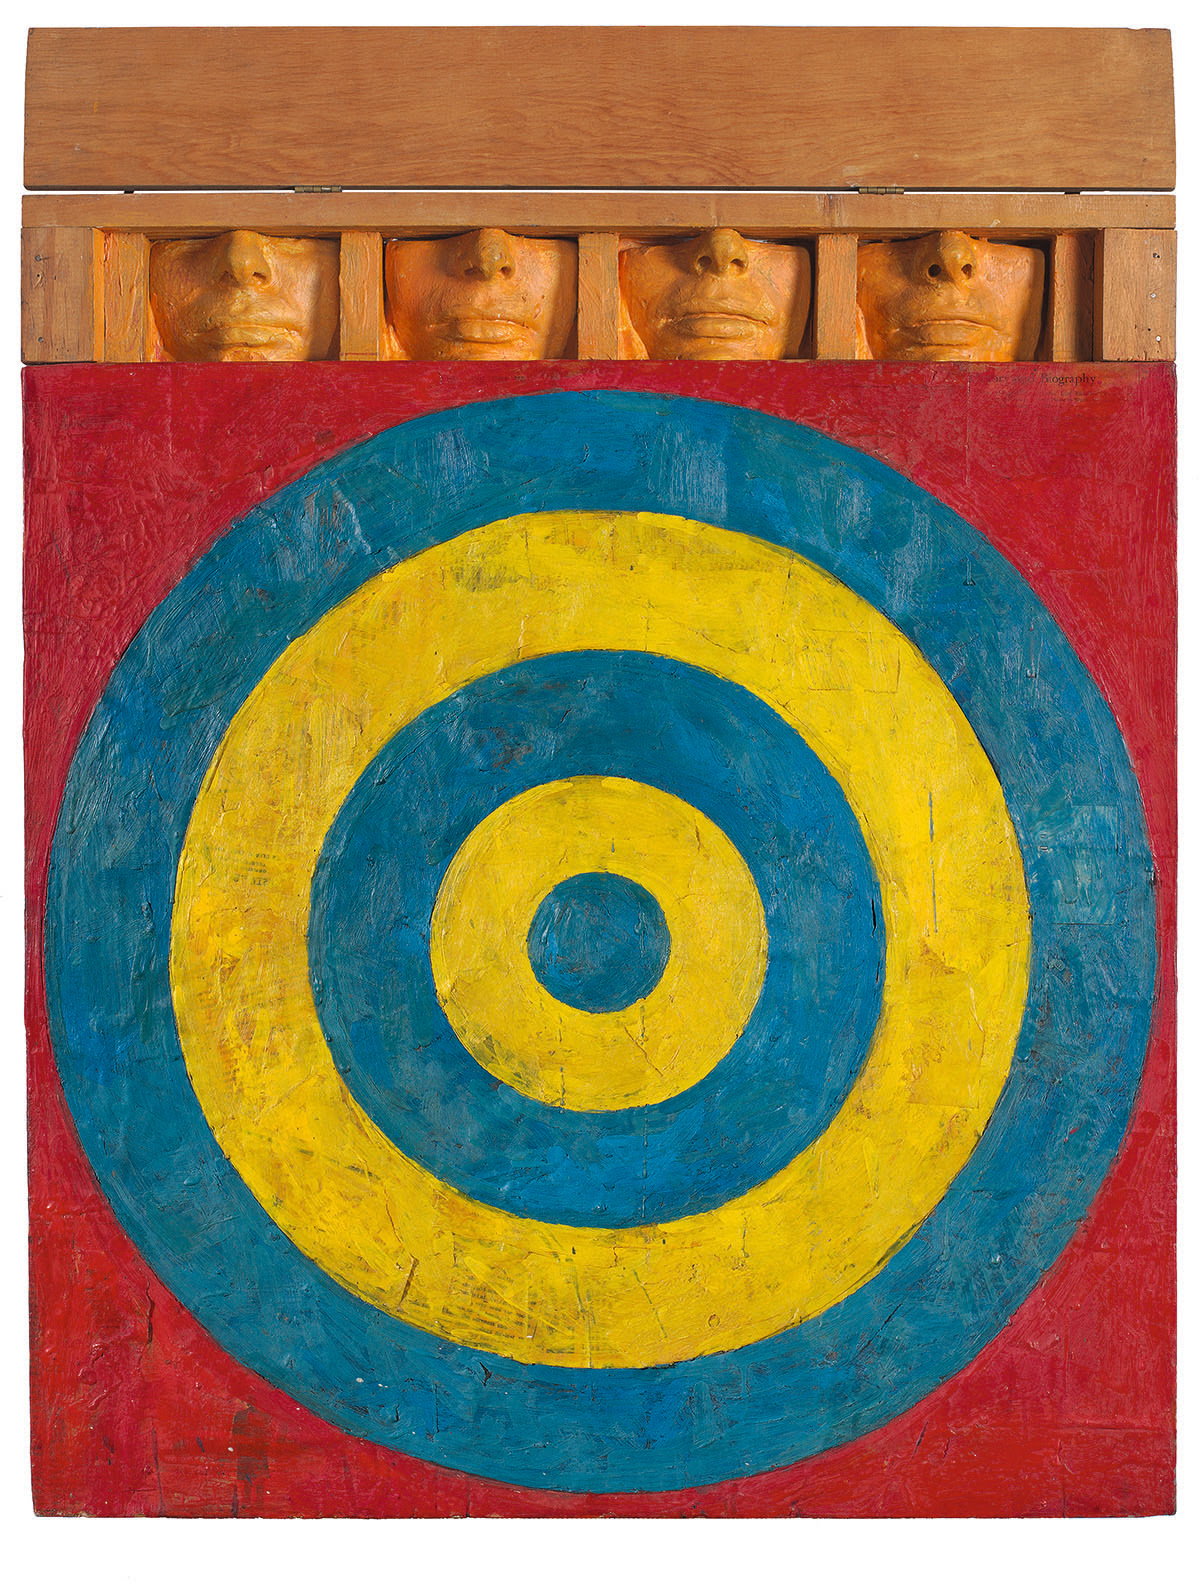 Jasper Johns, Target with Four Faces, 1955. Encaustic and collage on canvas with objects, 29 3/4 × 26 in. (75.6 × 66 cm). The Museum of Modern Art, New York; gift of Mr. and Mrs. Robert C. Scull 8.1958. © 2021 Jasper Johns / Licensed by VAGA at Artists Rights Society (ARS), New York. Photograph courtesy the Wildenstein Plattner Institute, New York